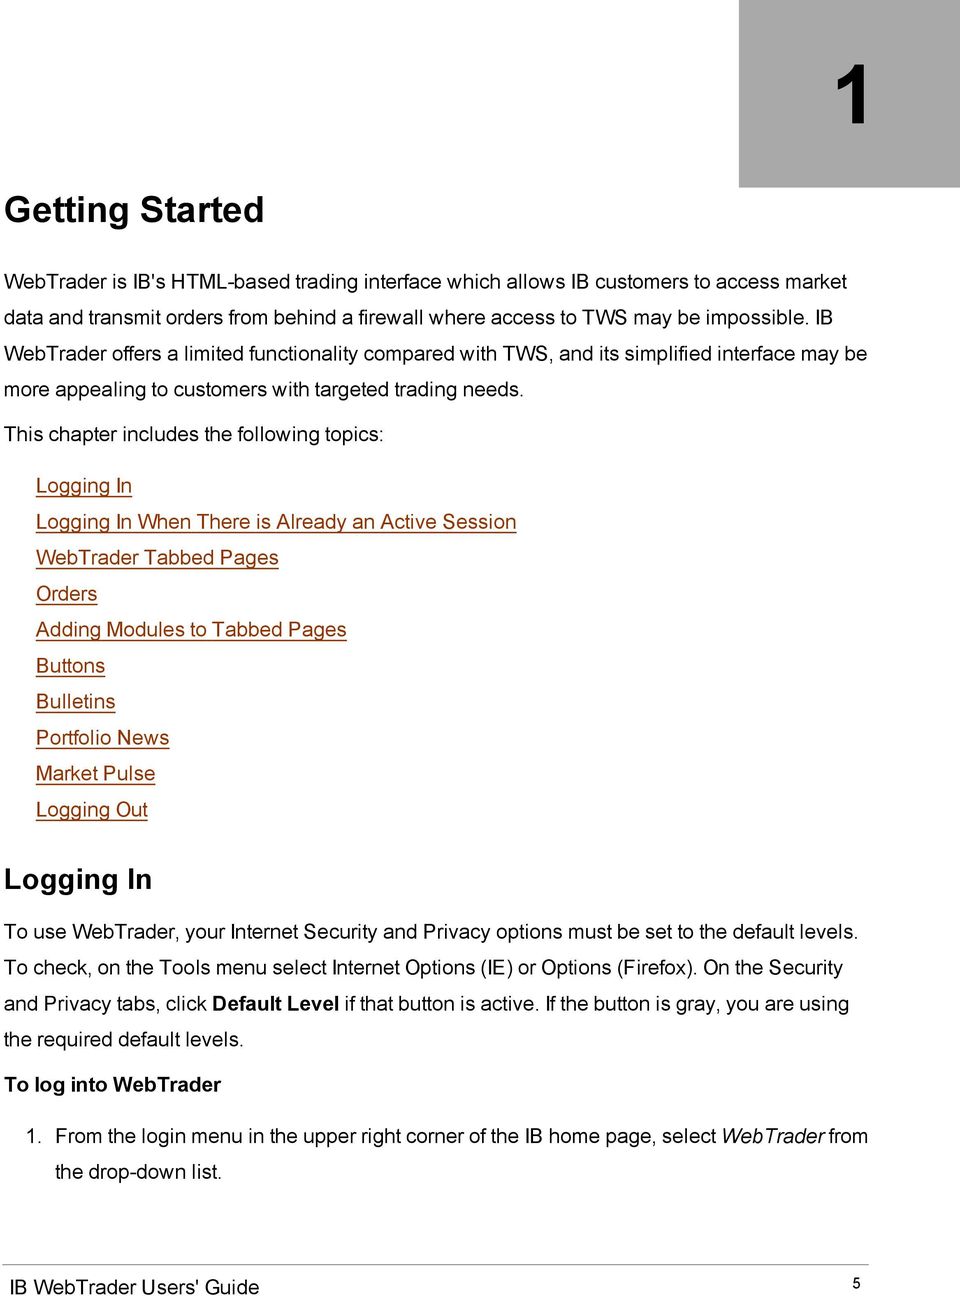 This chapter includes the fllwing tpics: Lgging In Lgging In When There is Already an Active Sessin WebTrader Tabbed Pages Orders Adding Mdules t Tabbed Pages Buttns Bulletins Prtfli News Market